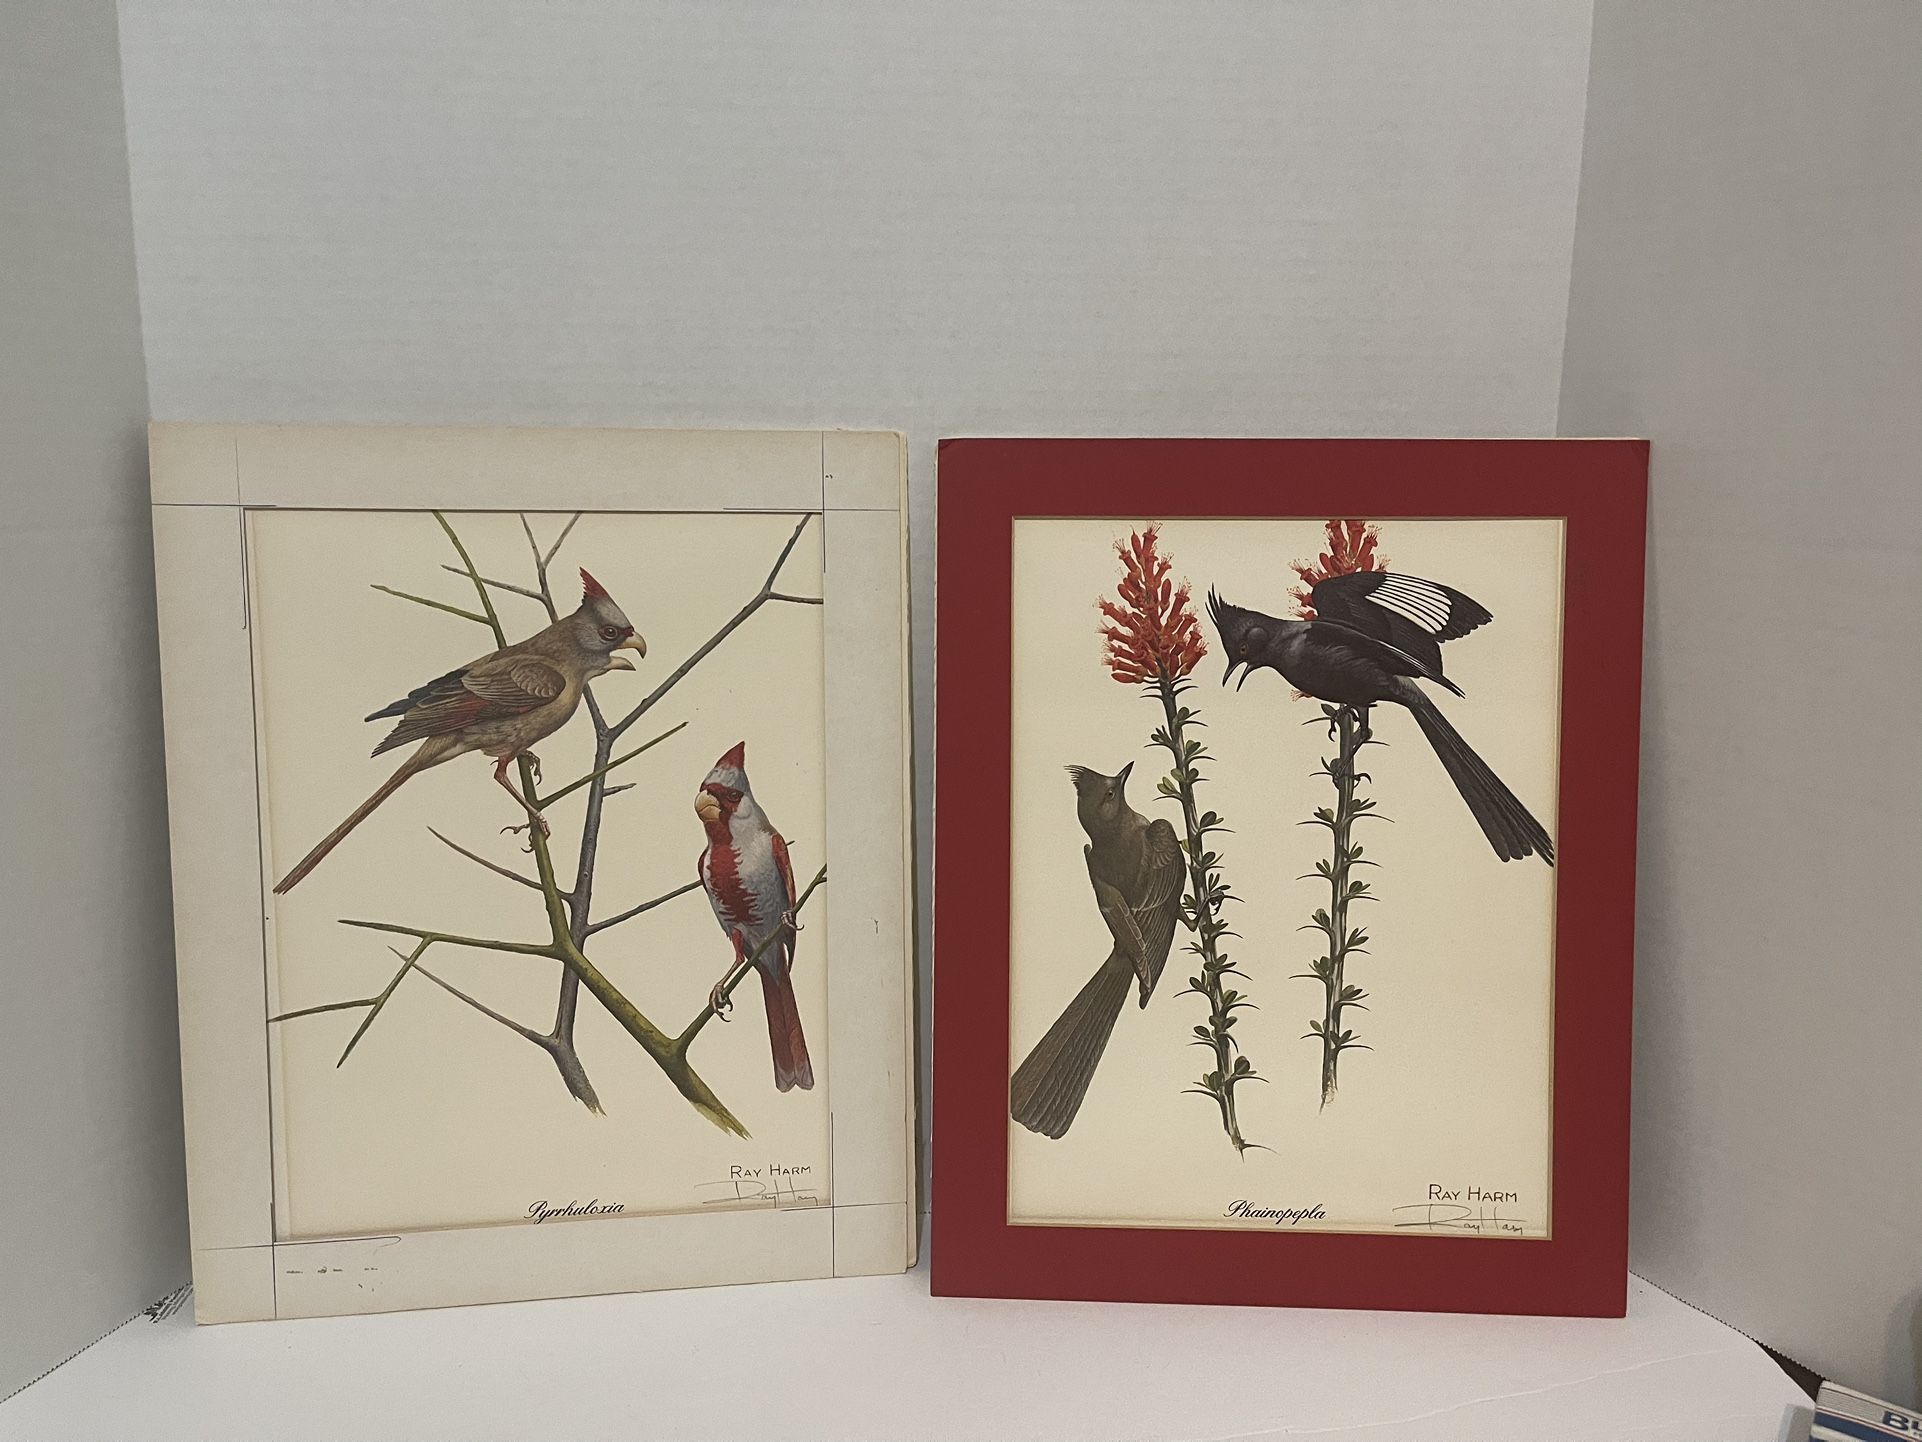 Two bird prints signed by artist Ray Harm.  